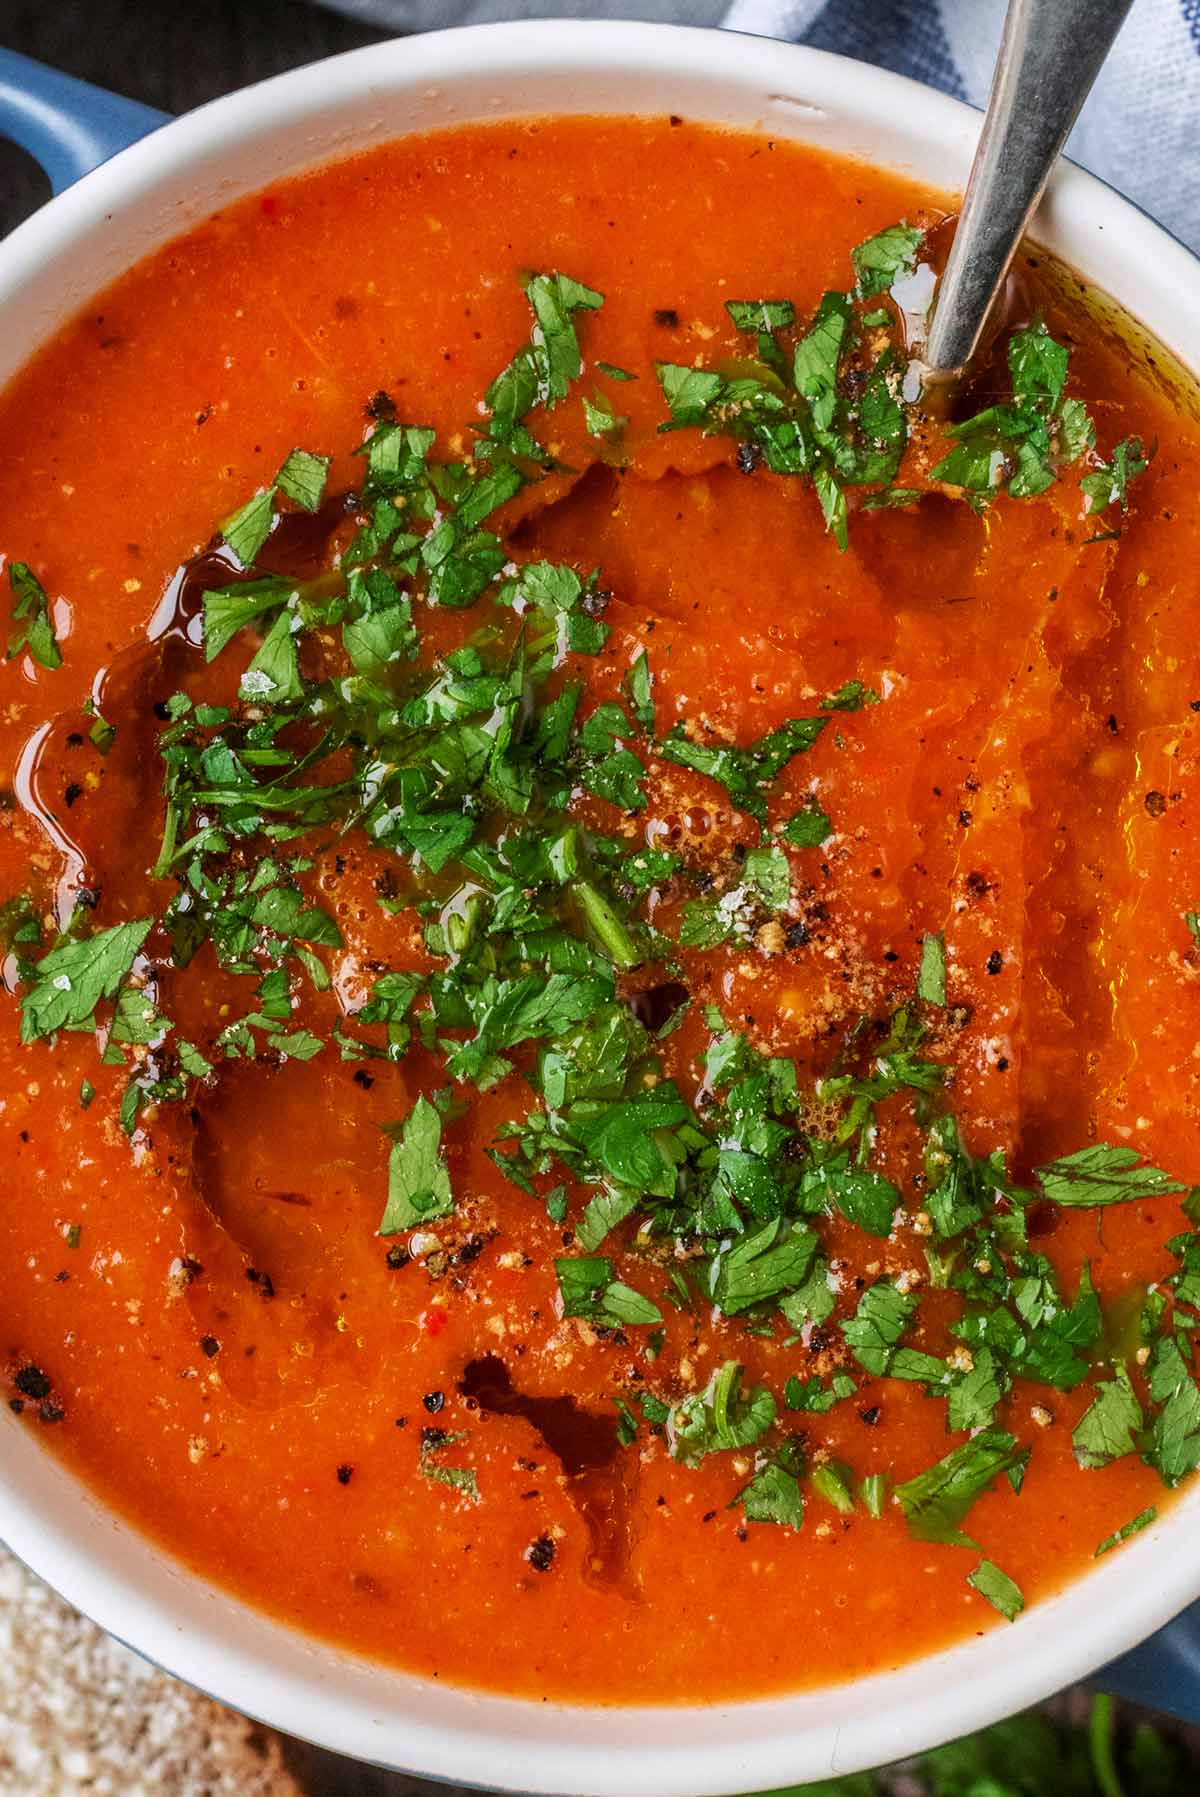 Chopped herbs scattered over tomato soup.